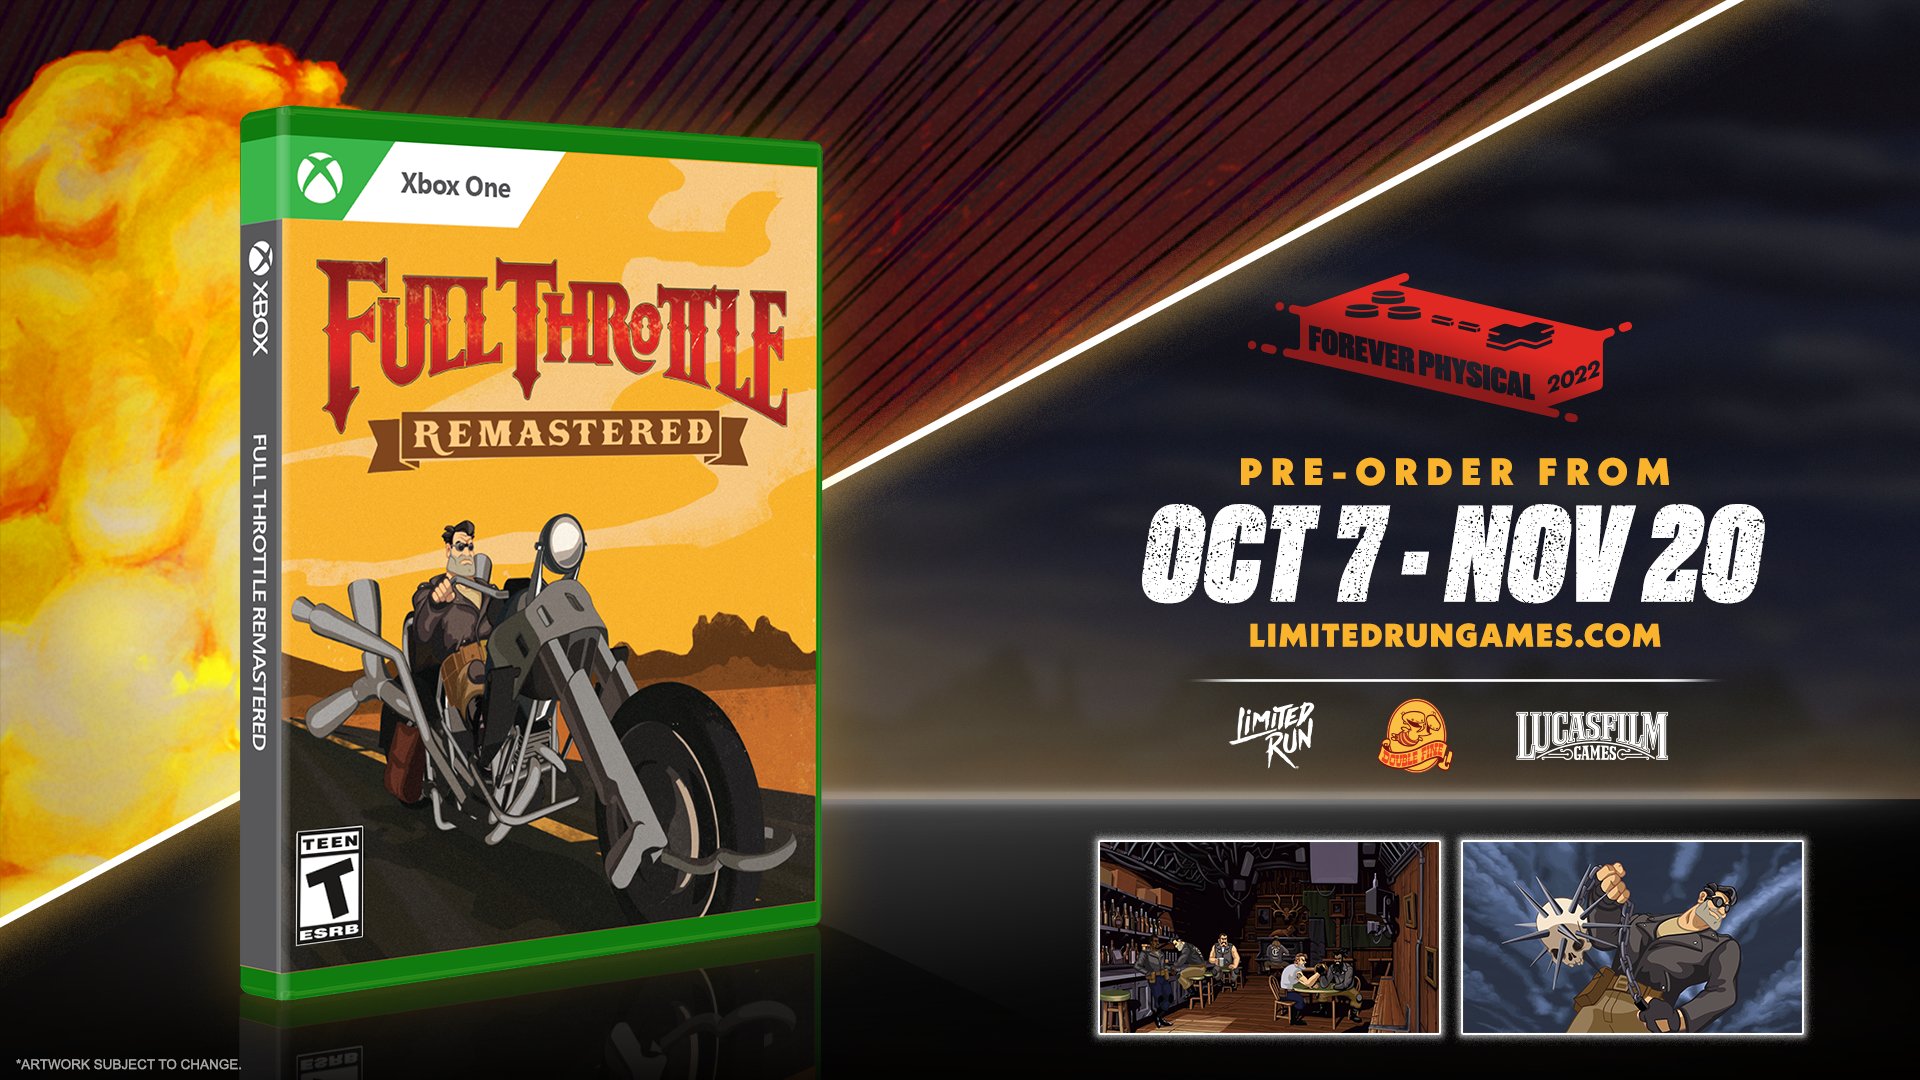 Limited Run Games on "We got a feeling in our guts that the road we're on is about to get a lot Pre-orders for Full Throttle: Remastered are LIVE! Pre-order